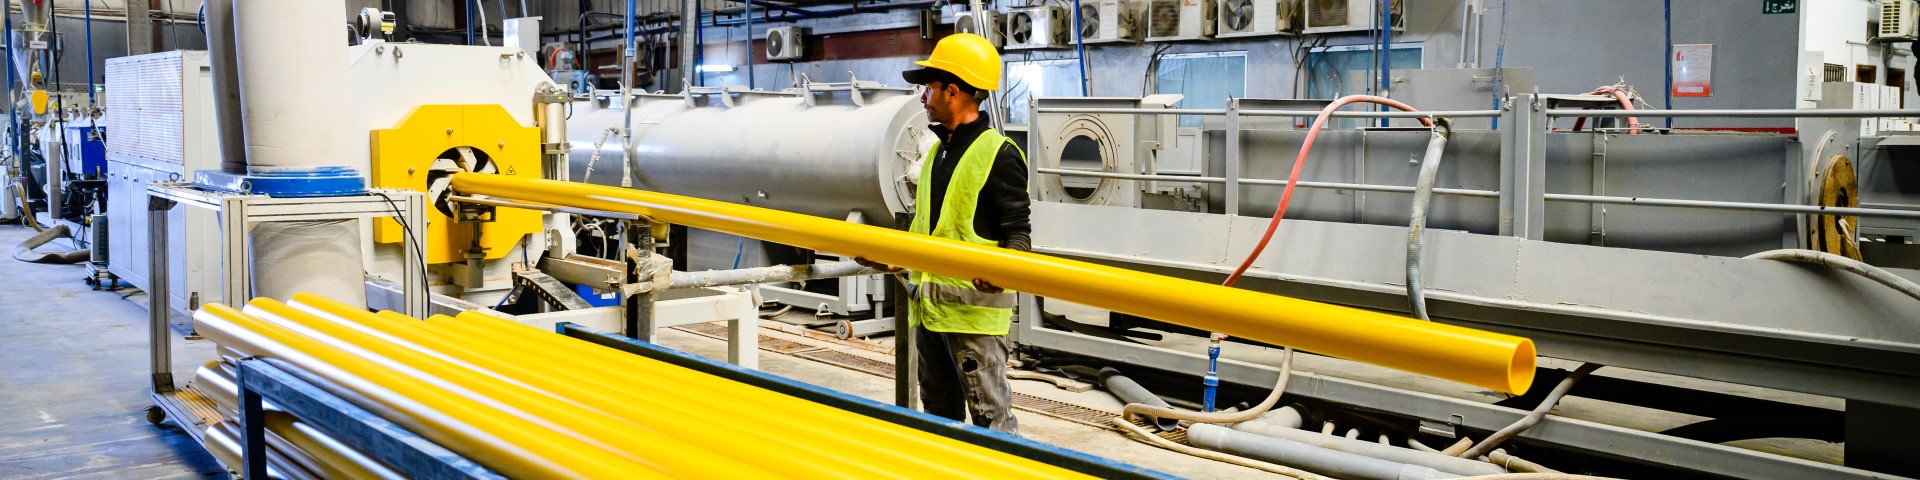 A worker operates machinery in a factory, handling a large yellow plastic pipe.